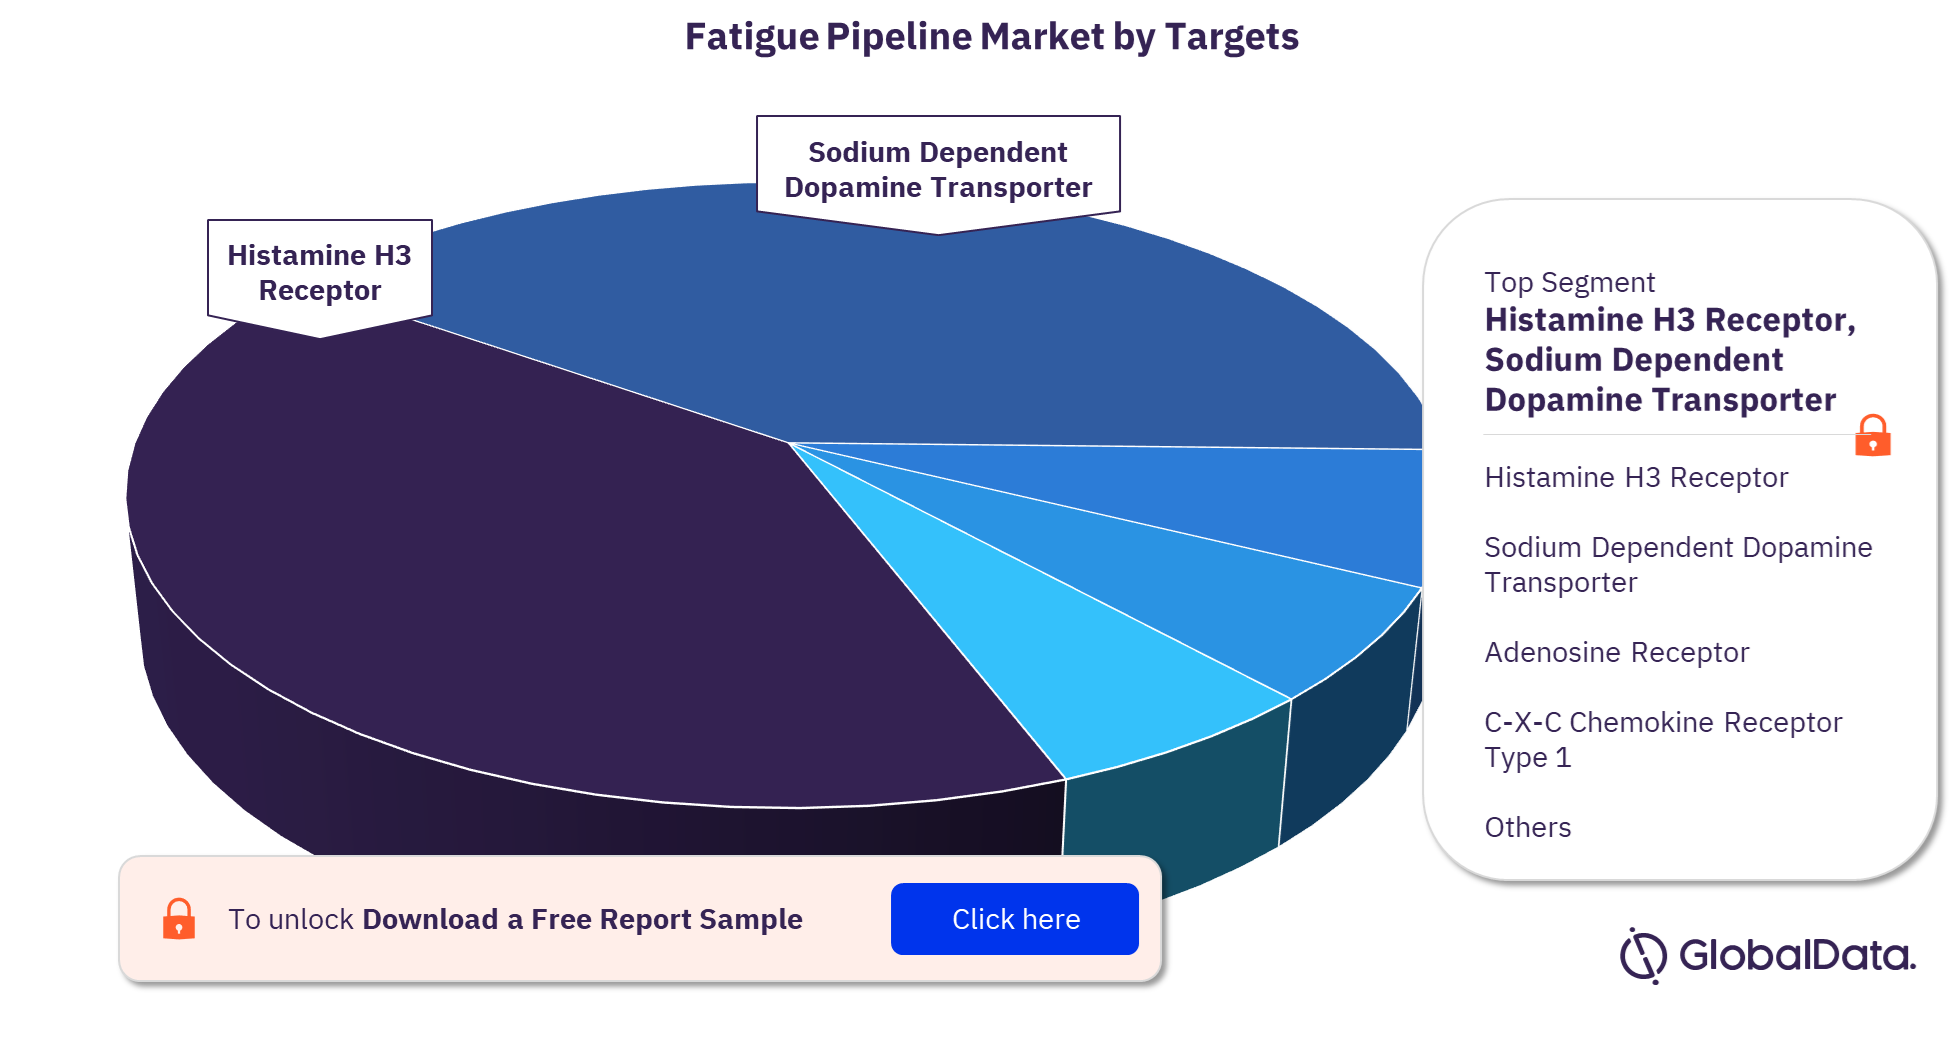 Fatigue pipeline market, by targets